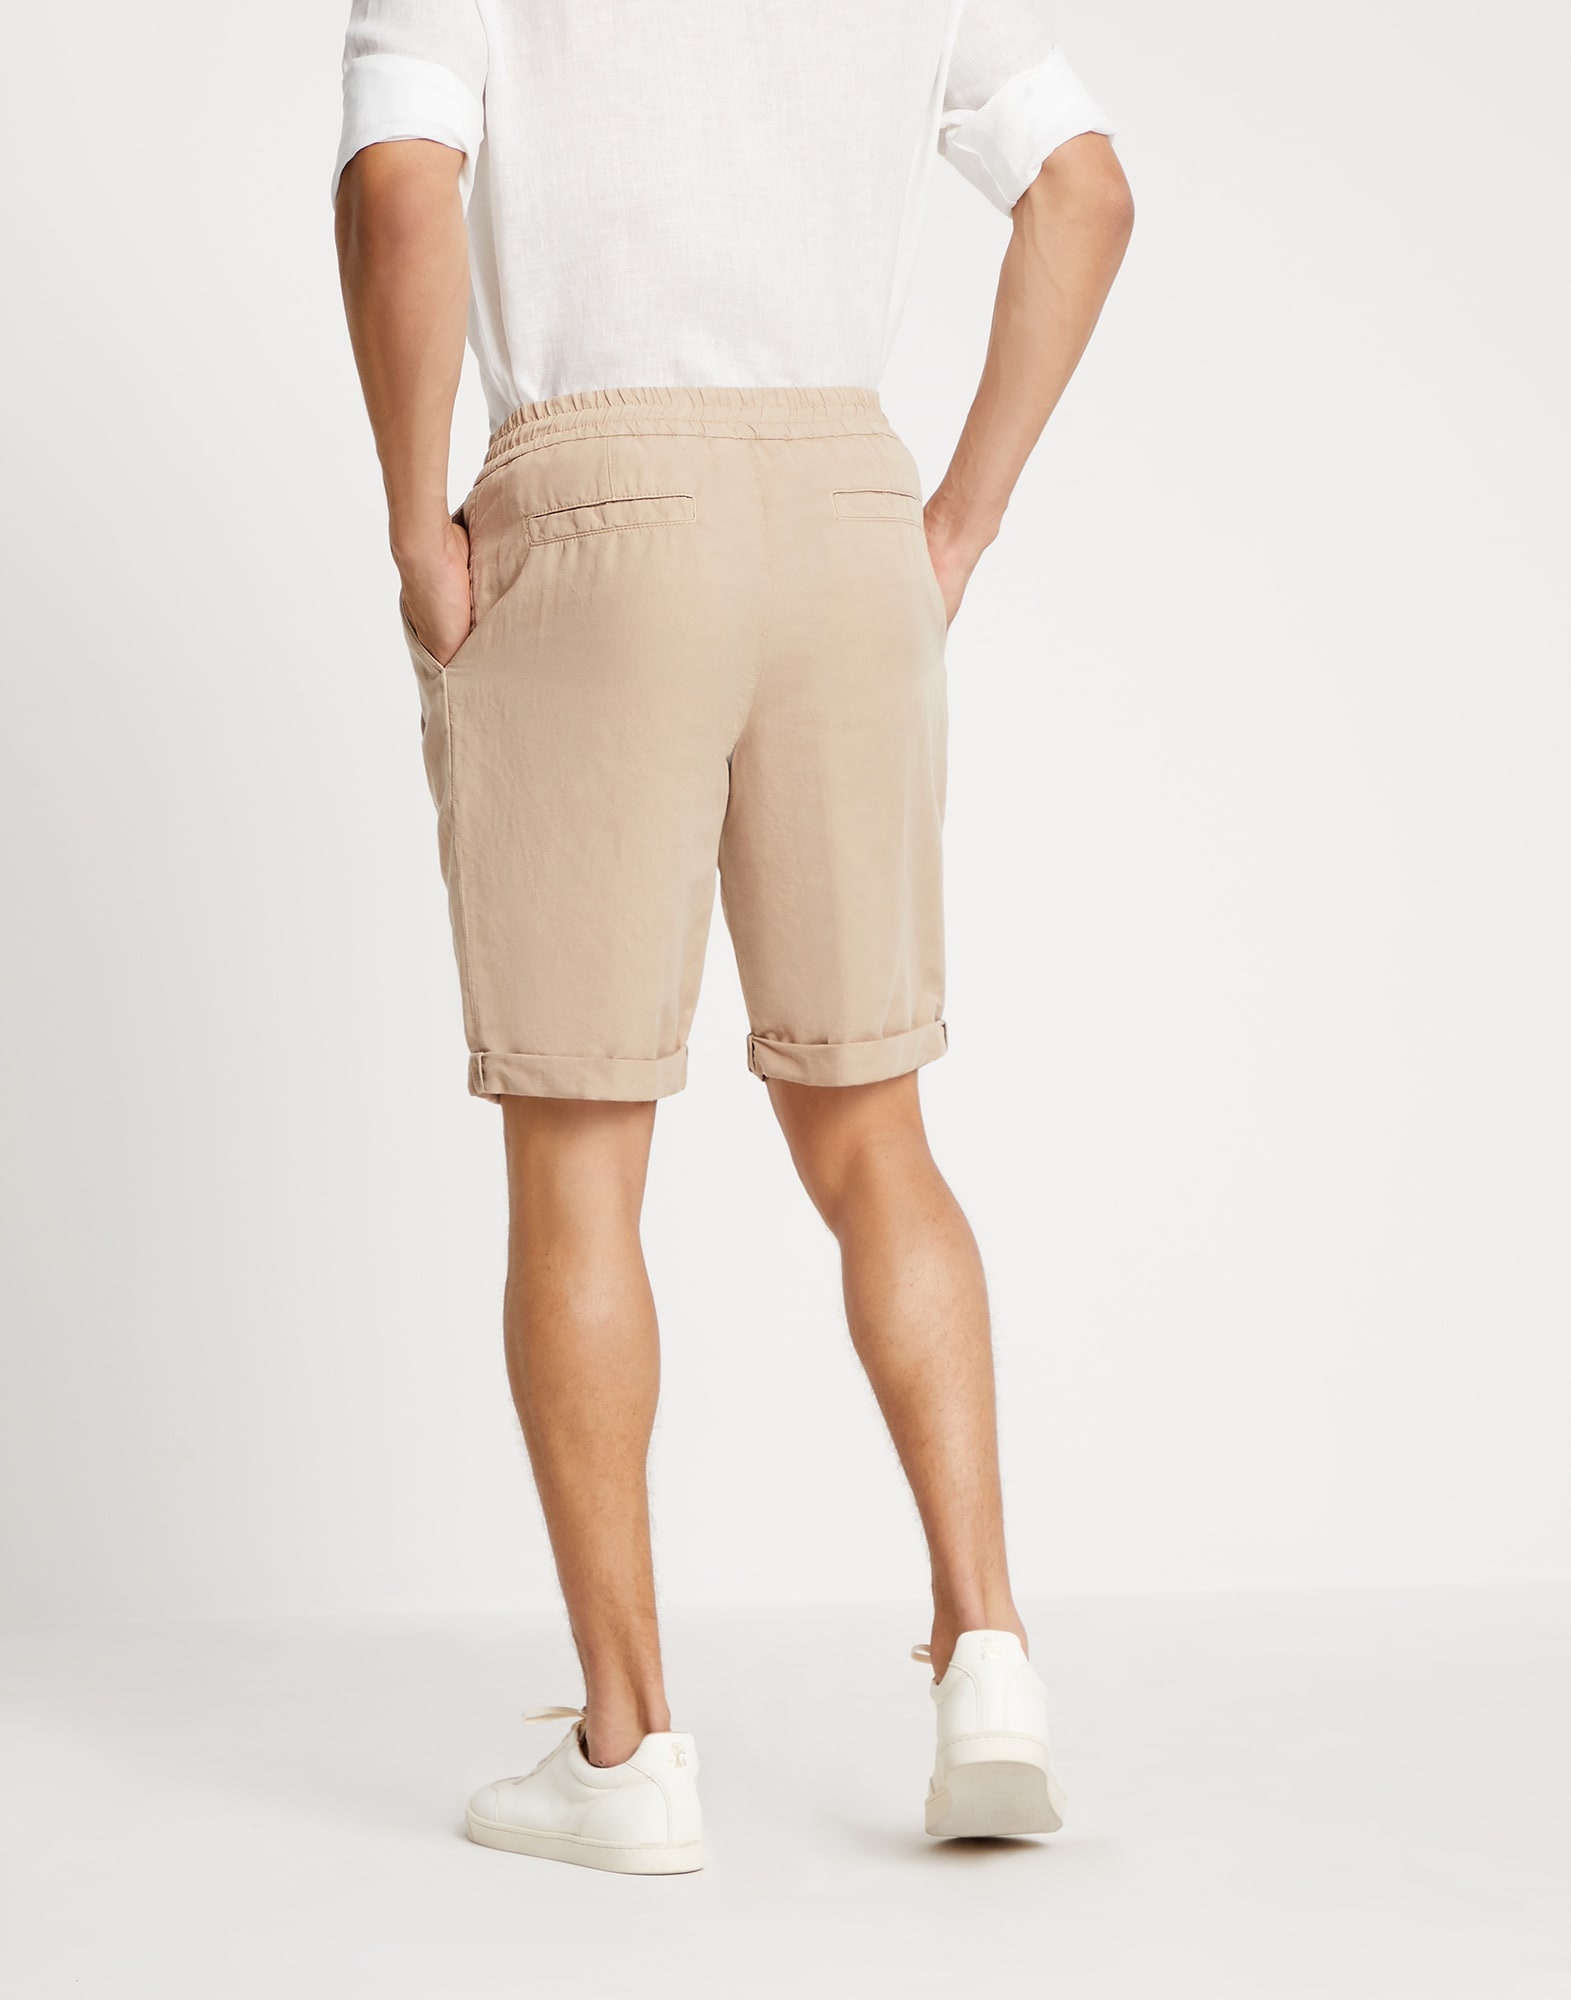 Garment-dyed Bermuda shorts in twisted linen and cotton gabardine with drawstring and double pleats - 2